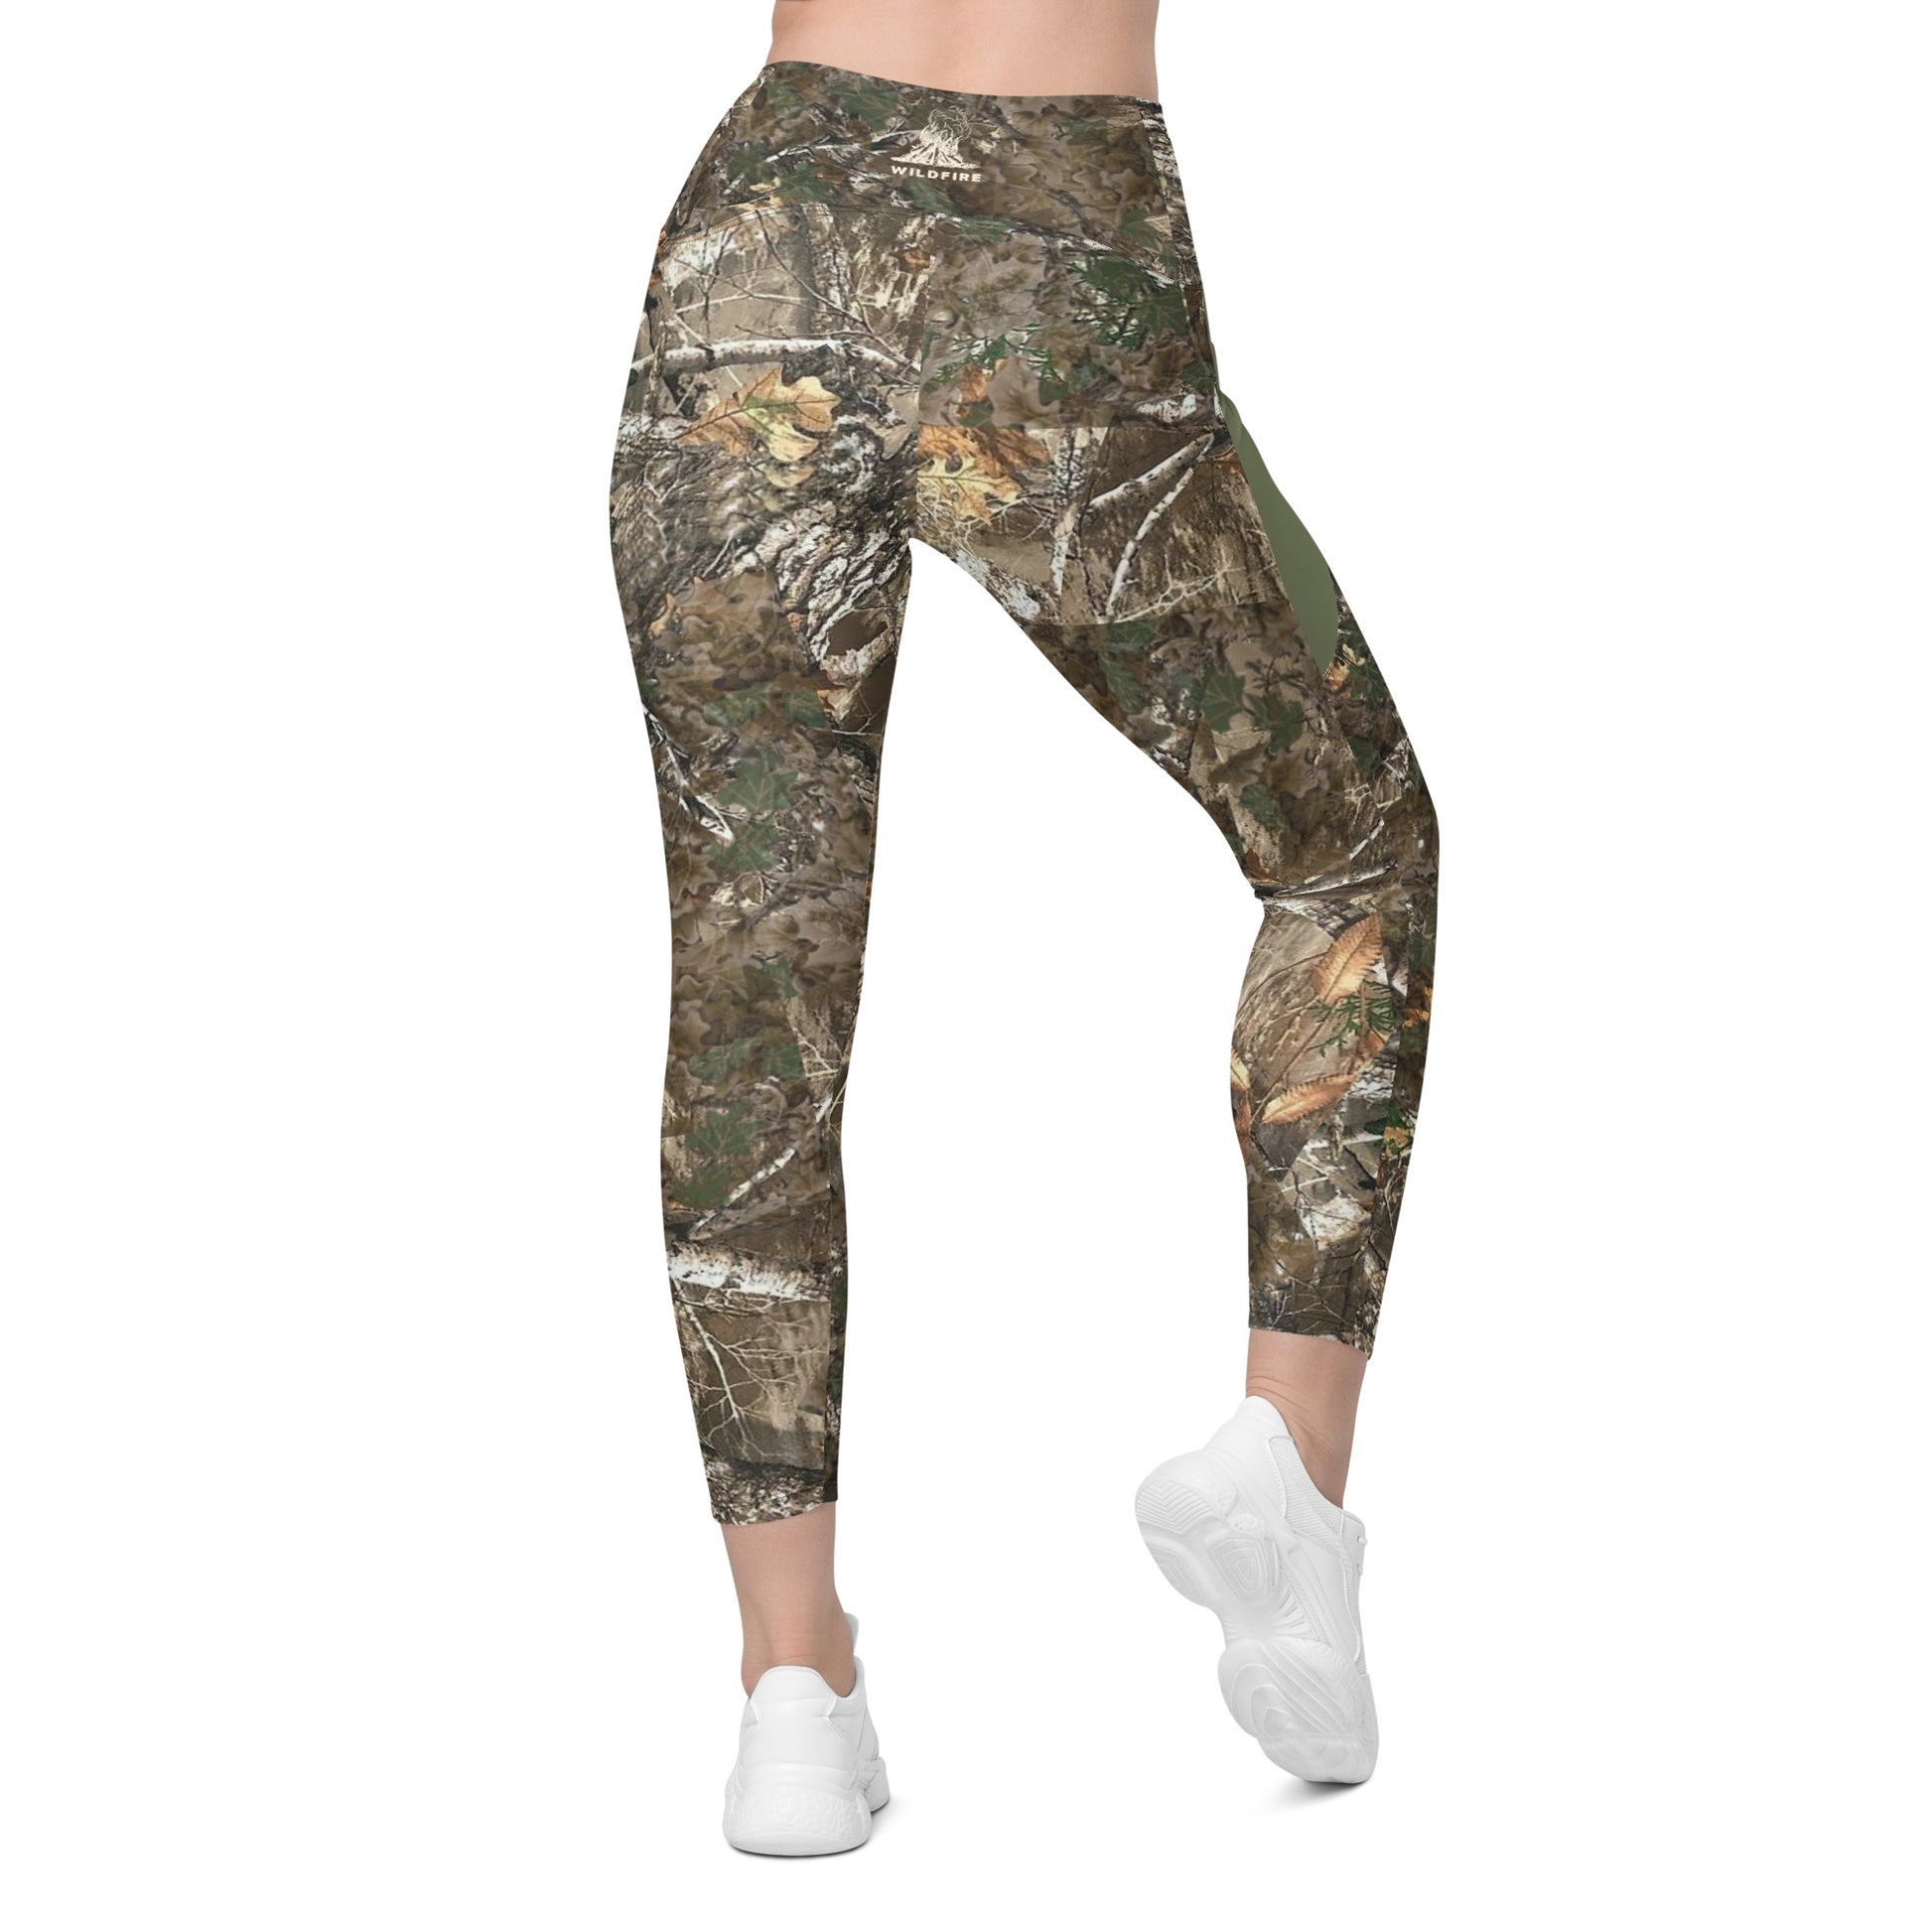 Wildfire Cigars Camouflage and military green activewear leggings facing the back